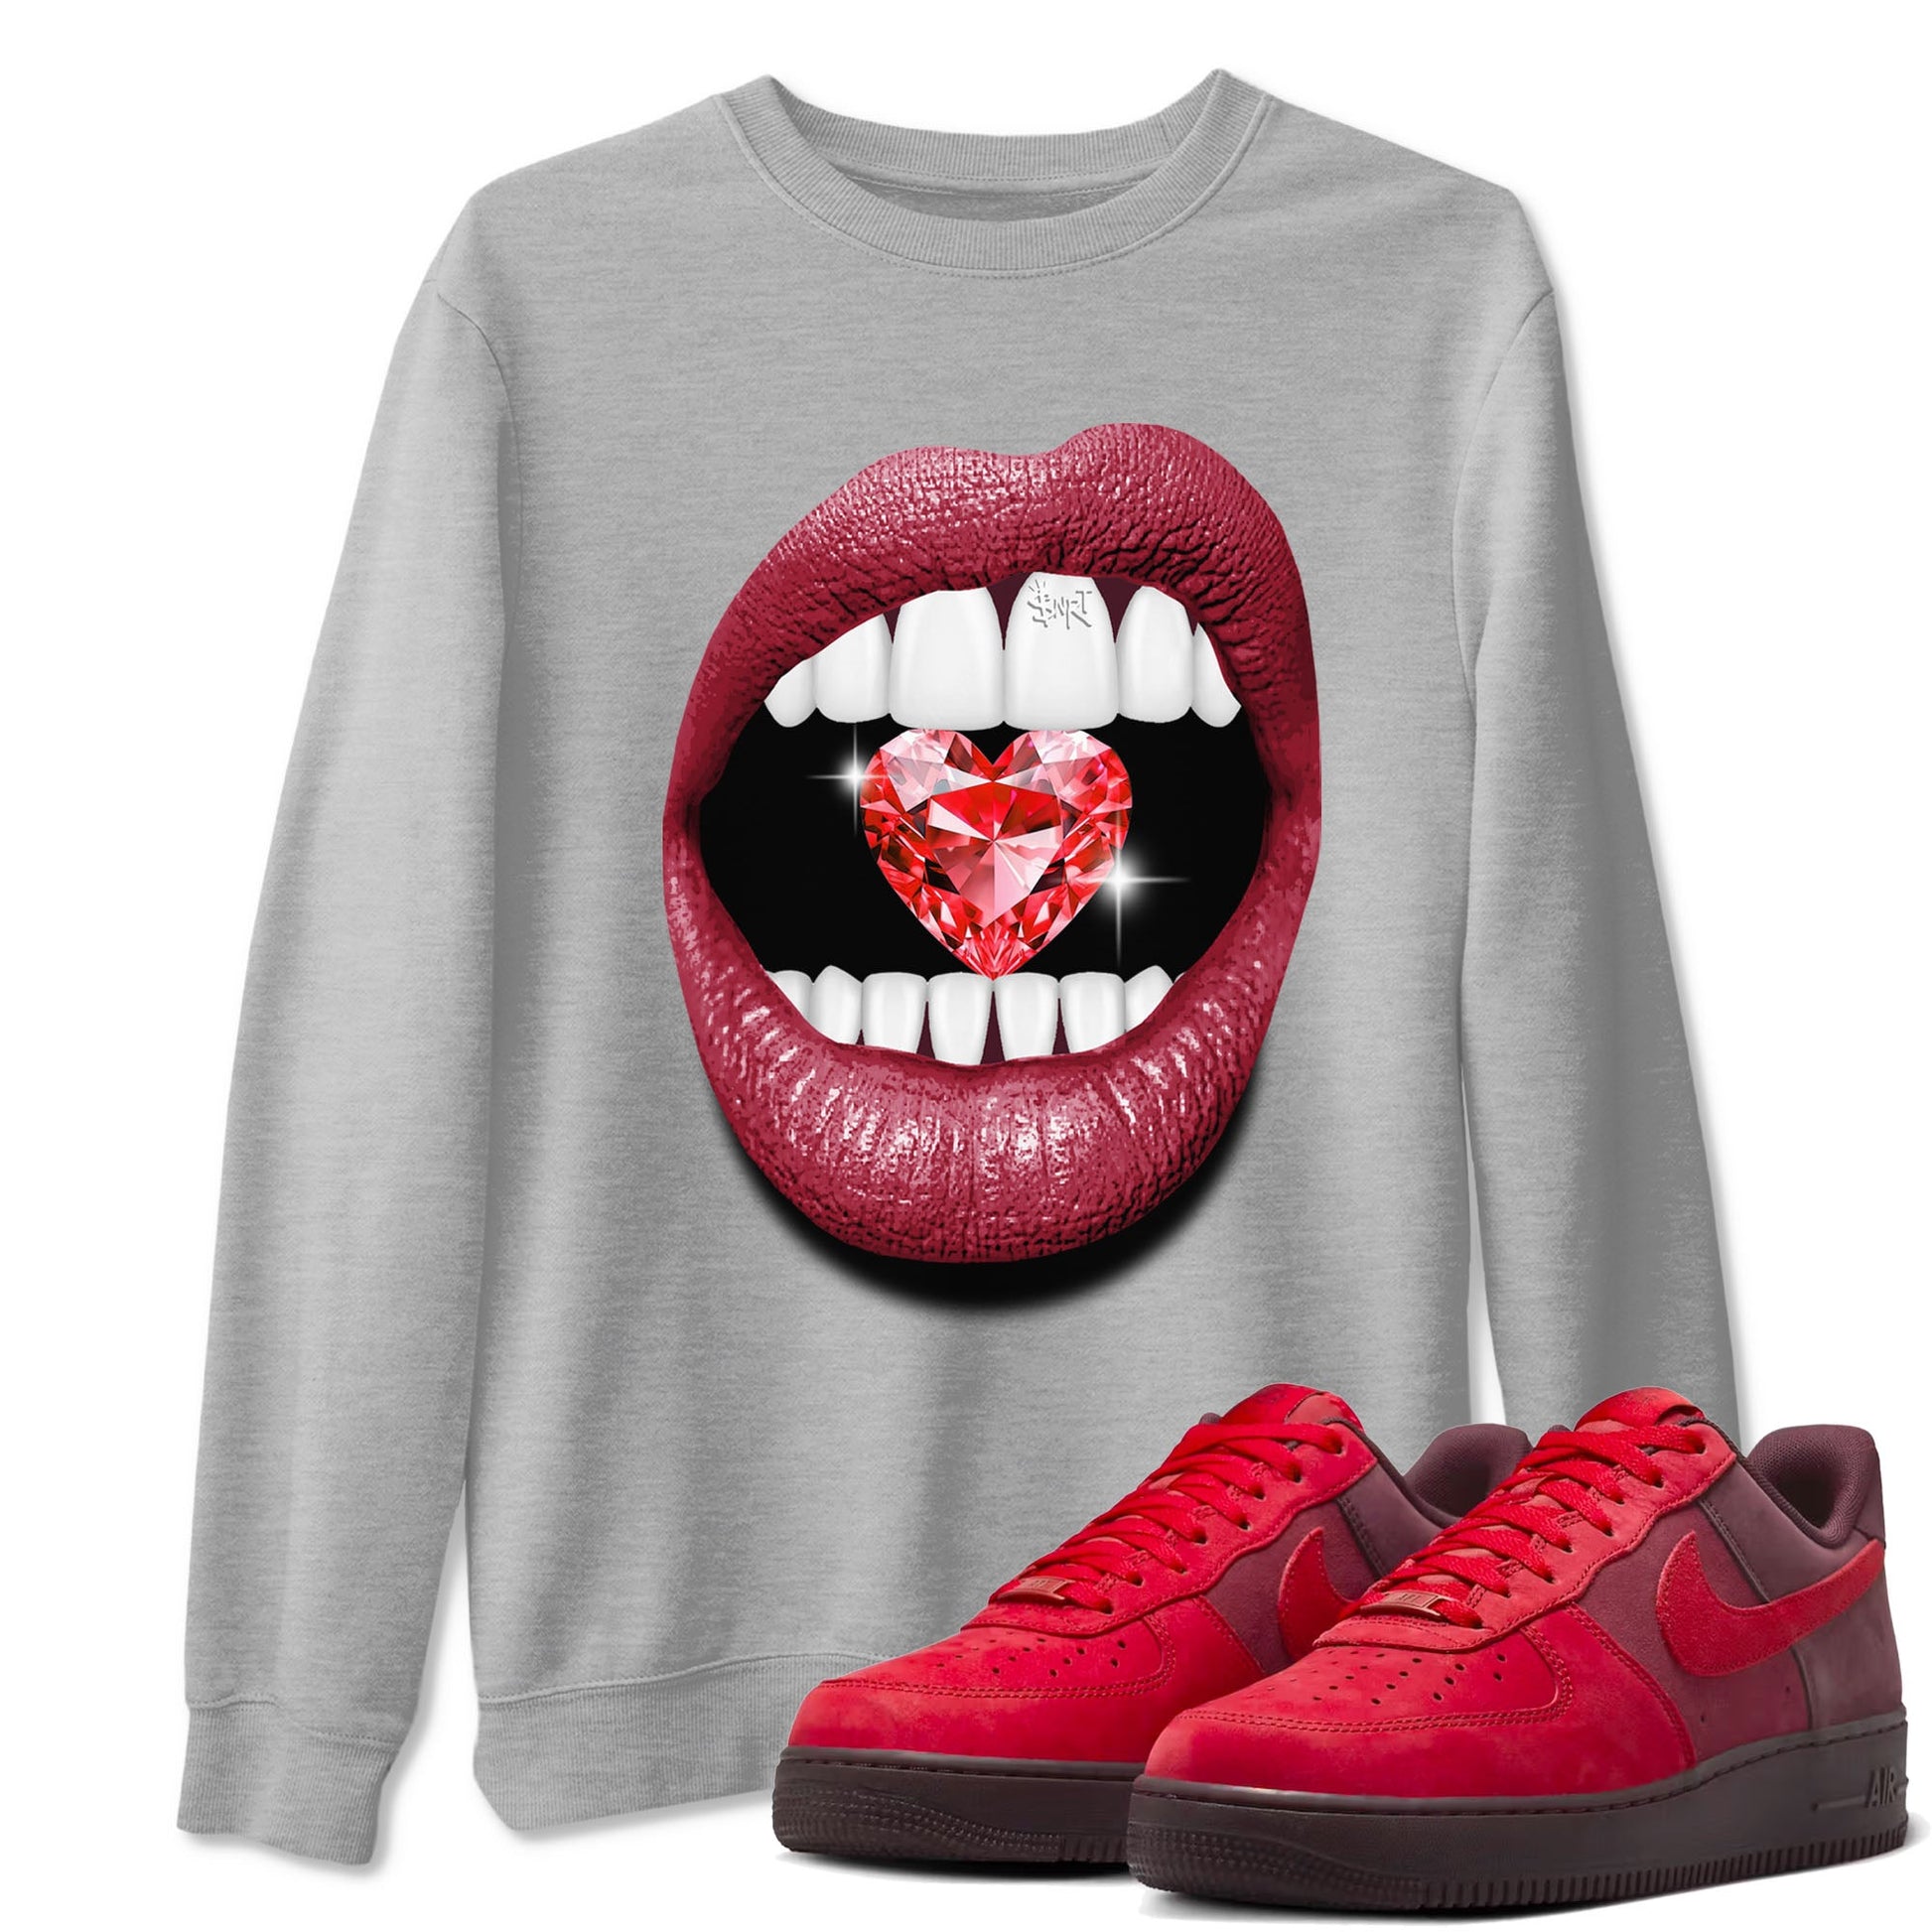 Lips Heart Diamond sneaker match tees to Special Valentine's Day street fashion brand for shirts to match Jordans SNRT Sneaker Tees Air Force 1 Valentines Day unisex t-shirt Heather Grey 1 unisex shirt